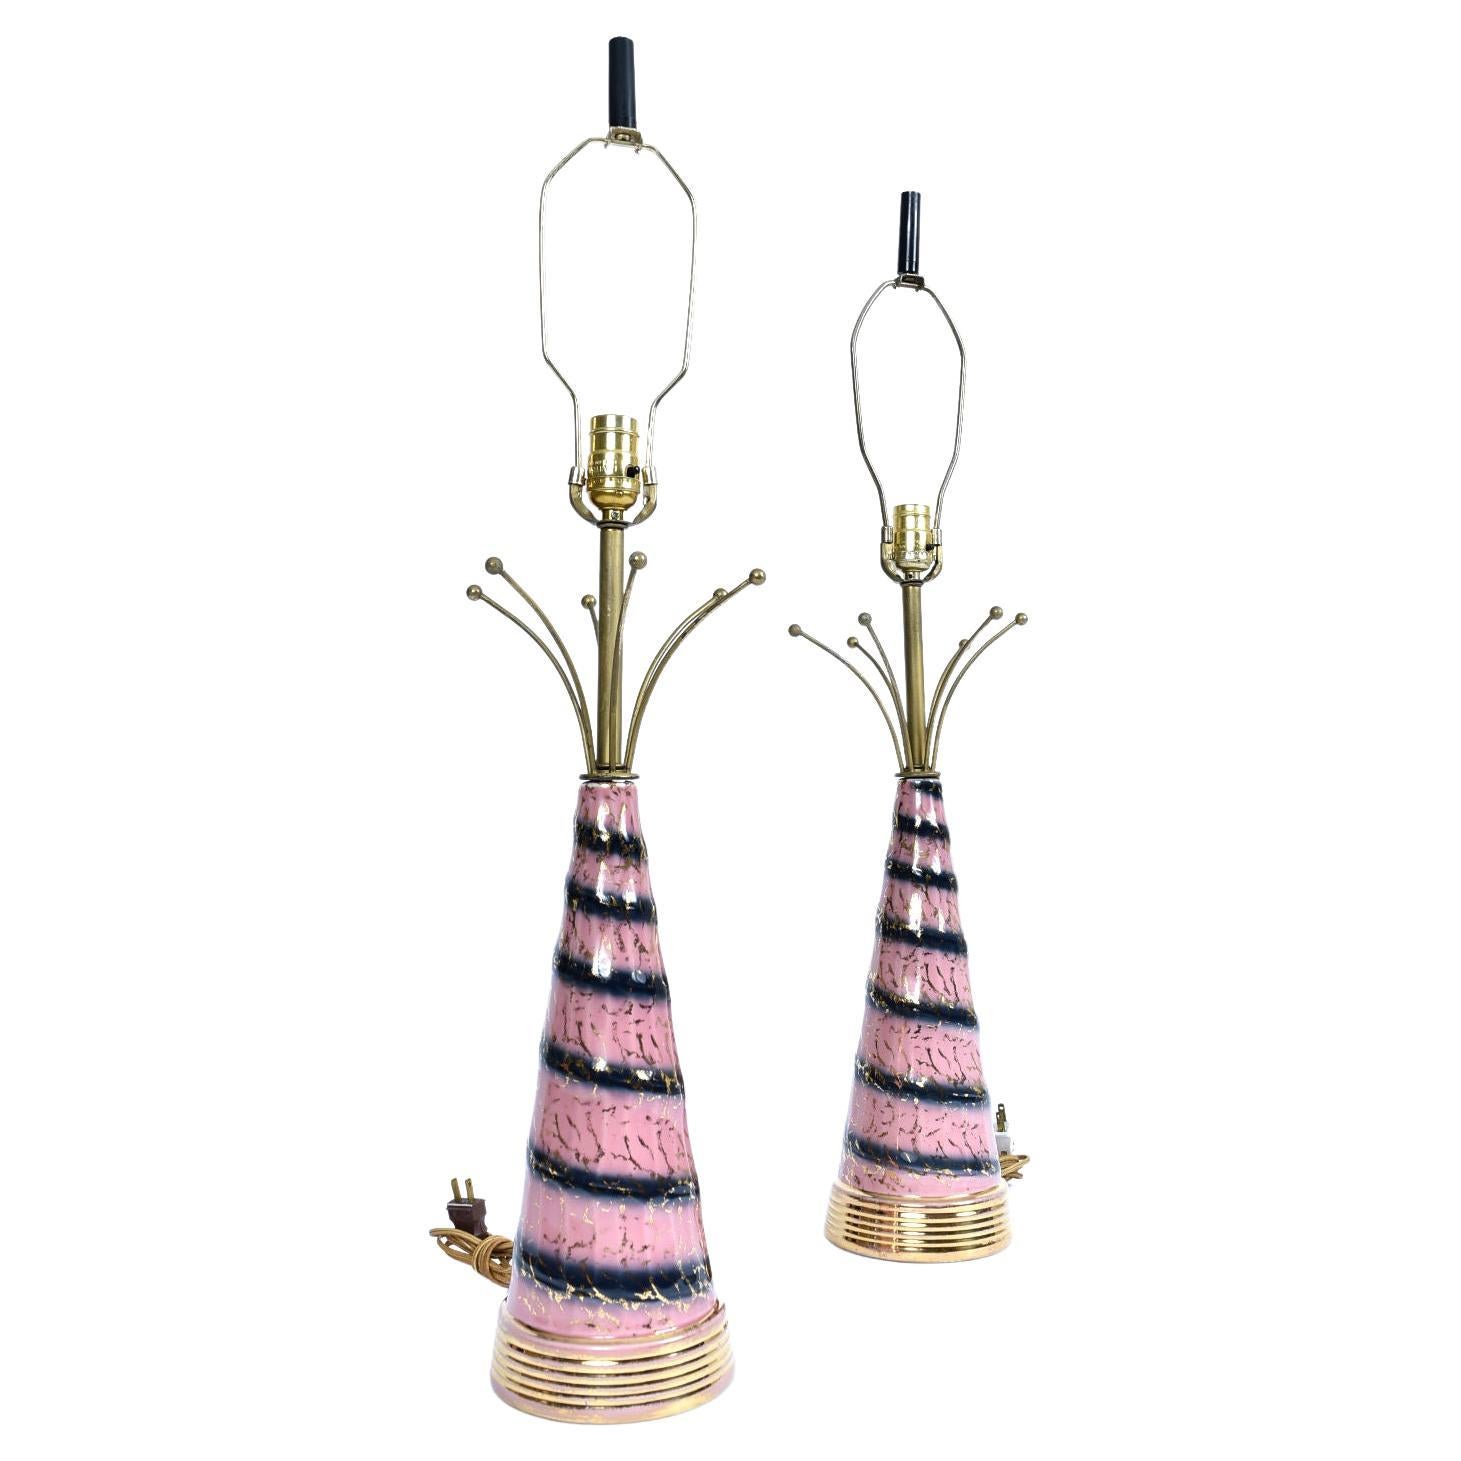 Delightfully novel pair of Mid-Century Modern atomic age lamps. The pink, gold and black lamps are topped with a whimsical “atomic age” metal embellishment. The gold colored steel spires are punctuated by gold spheres, a form inspired by the atom.